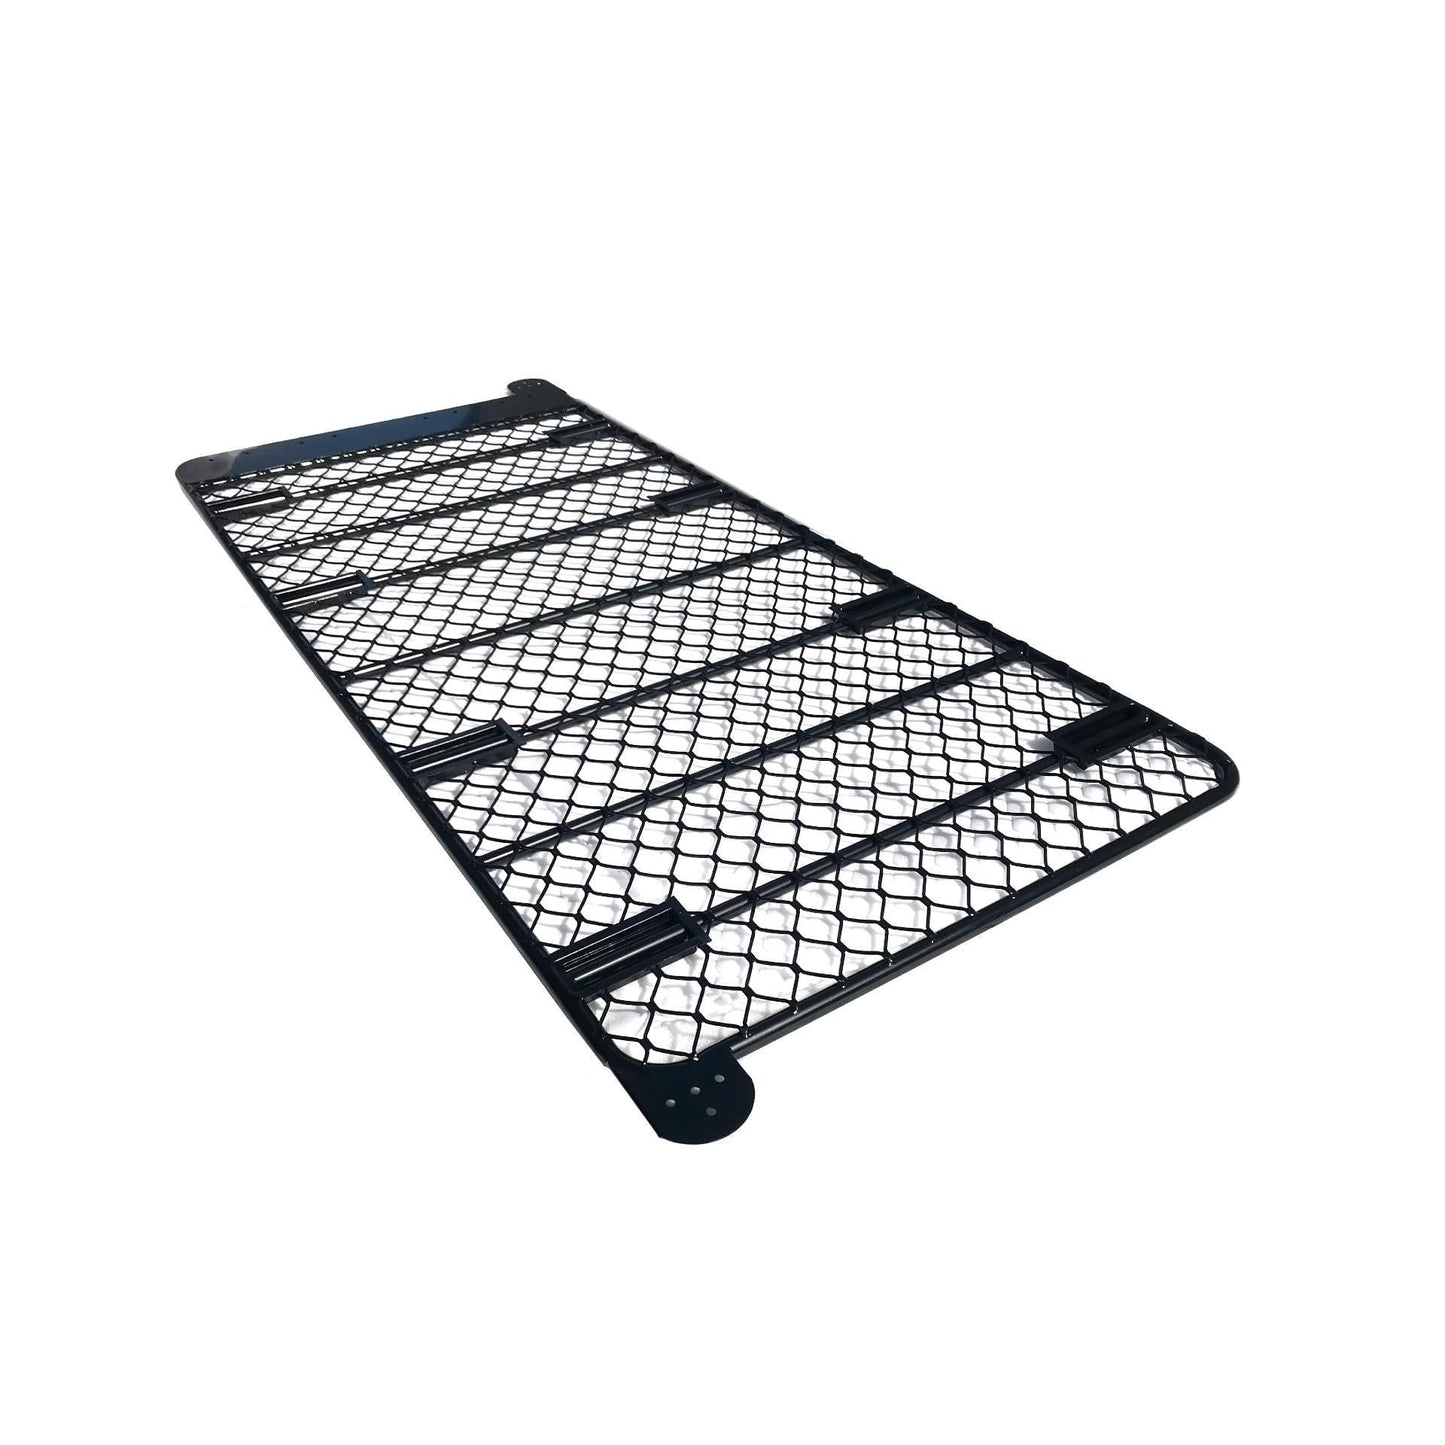 Expedition Aluminium Flat Roof Rack for Land Rover Defender 110 1971-2016